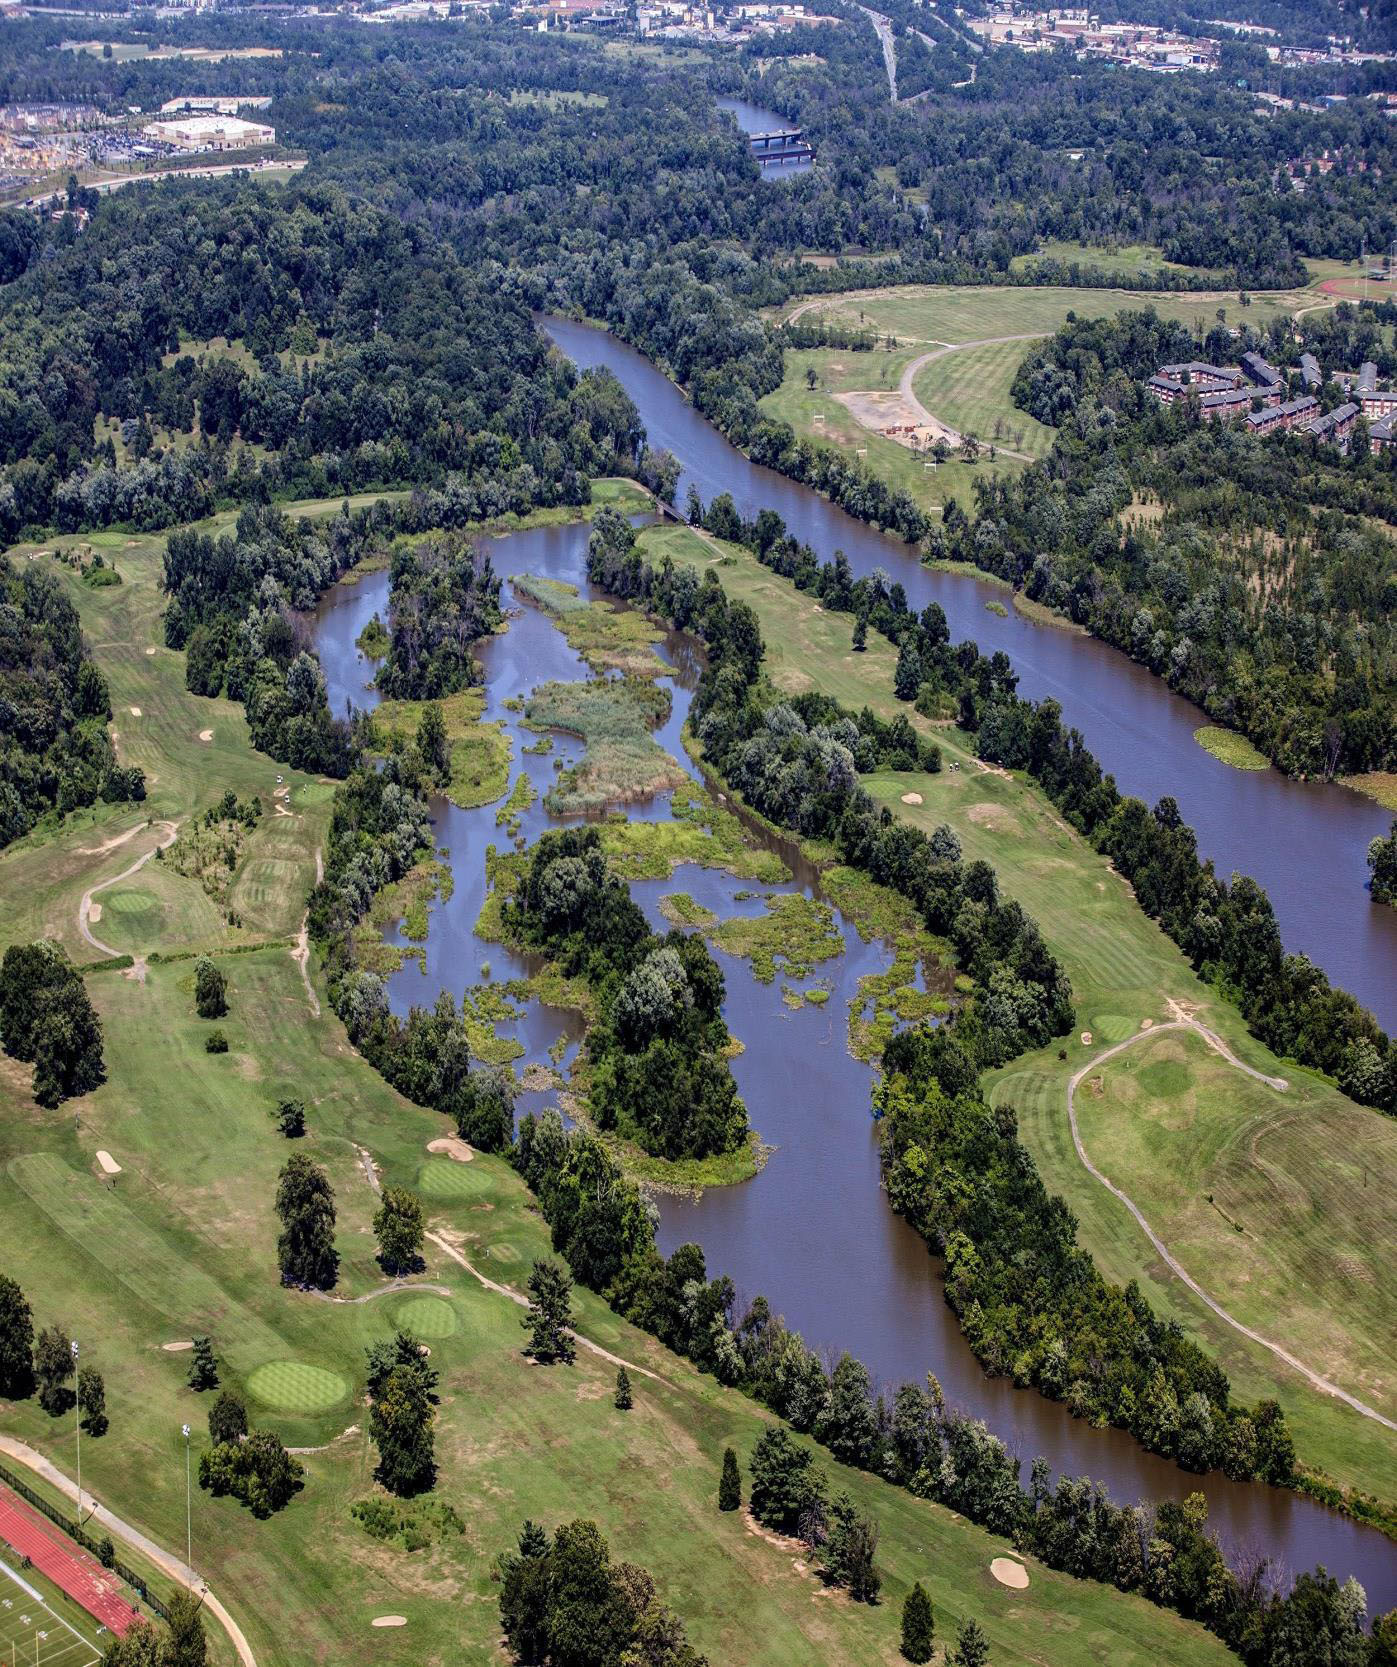 relates to Pursuits Weekly: Revitalizing Municipal Golf Across America